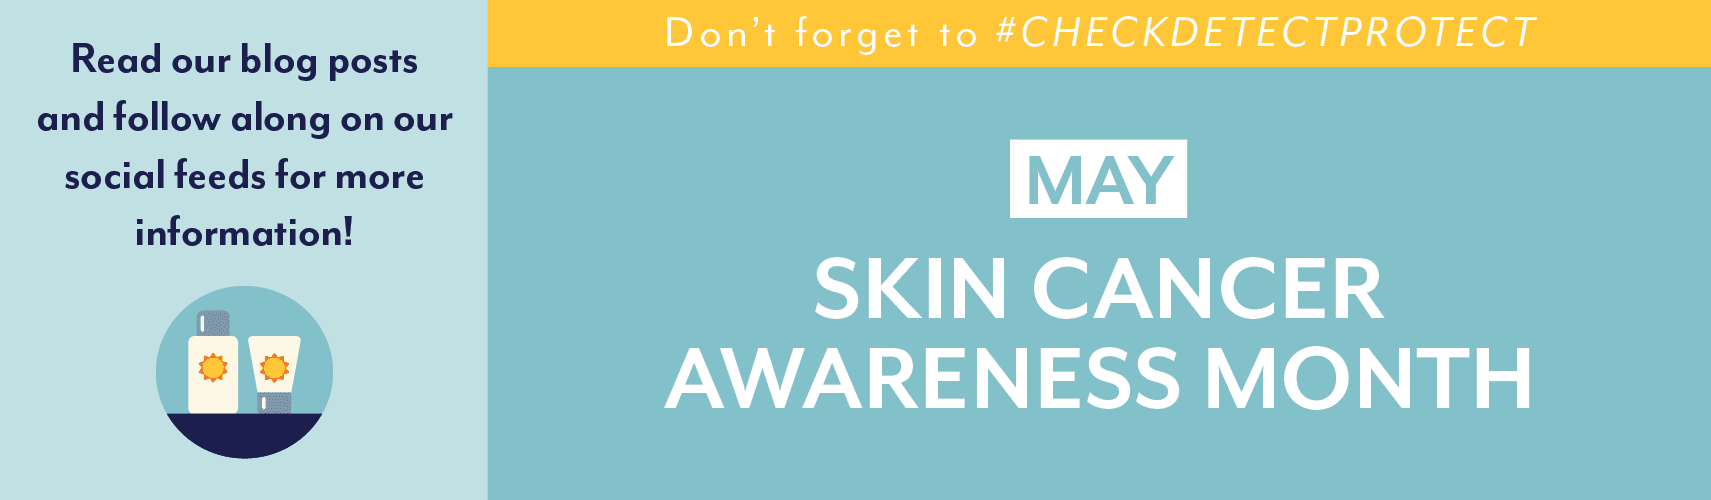 May skin cancer awareness month banner graphic